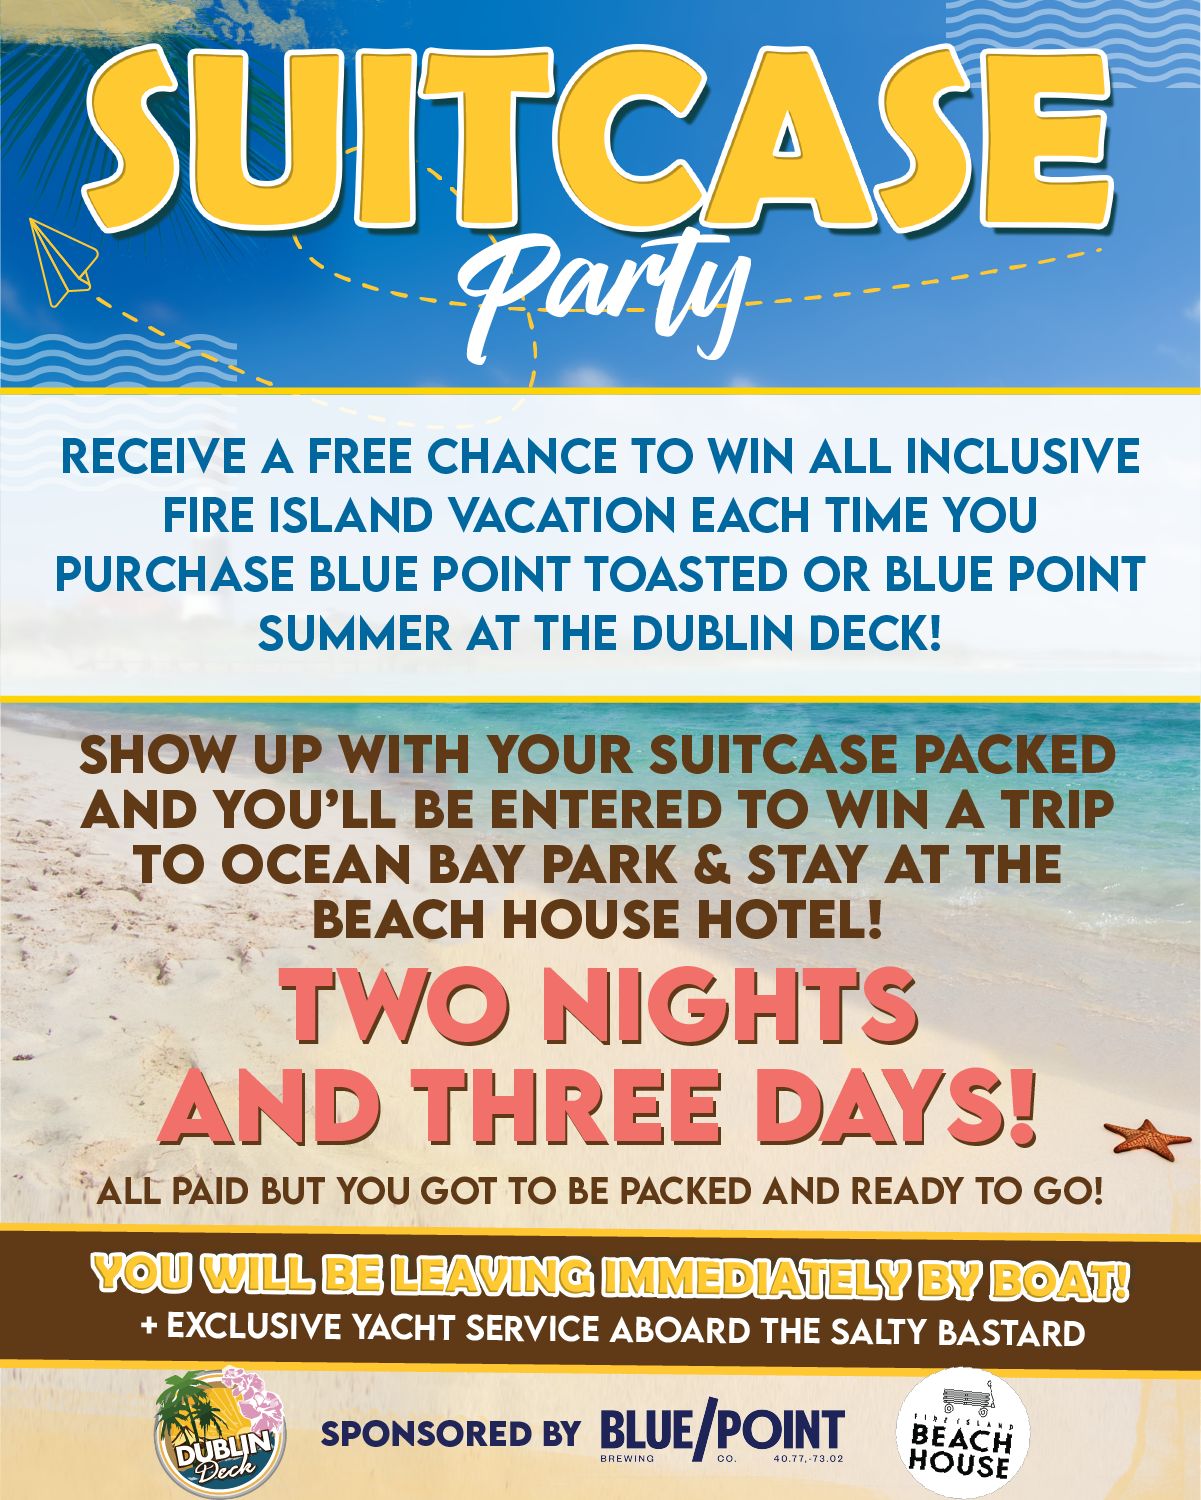 We're giving you a chance to win a two-night stay in Fire Island just by showing up to the Deck. Oh, did we mention you leave RIGHT from the Deck? So bring your suitcase! Must be packed and ready to go to win! Party's on at 6 PM, drawing's at 7:30 PM! 